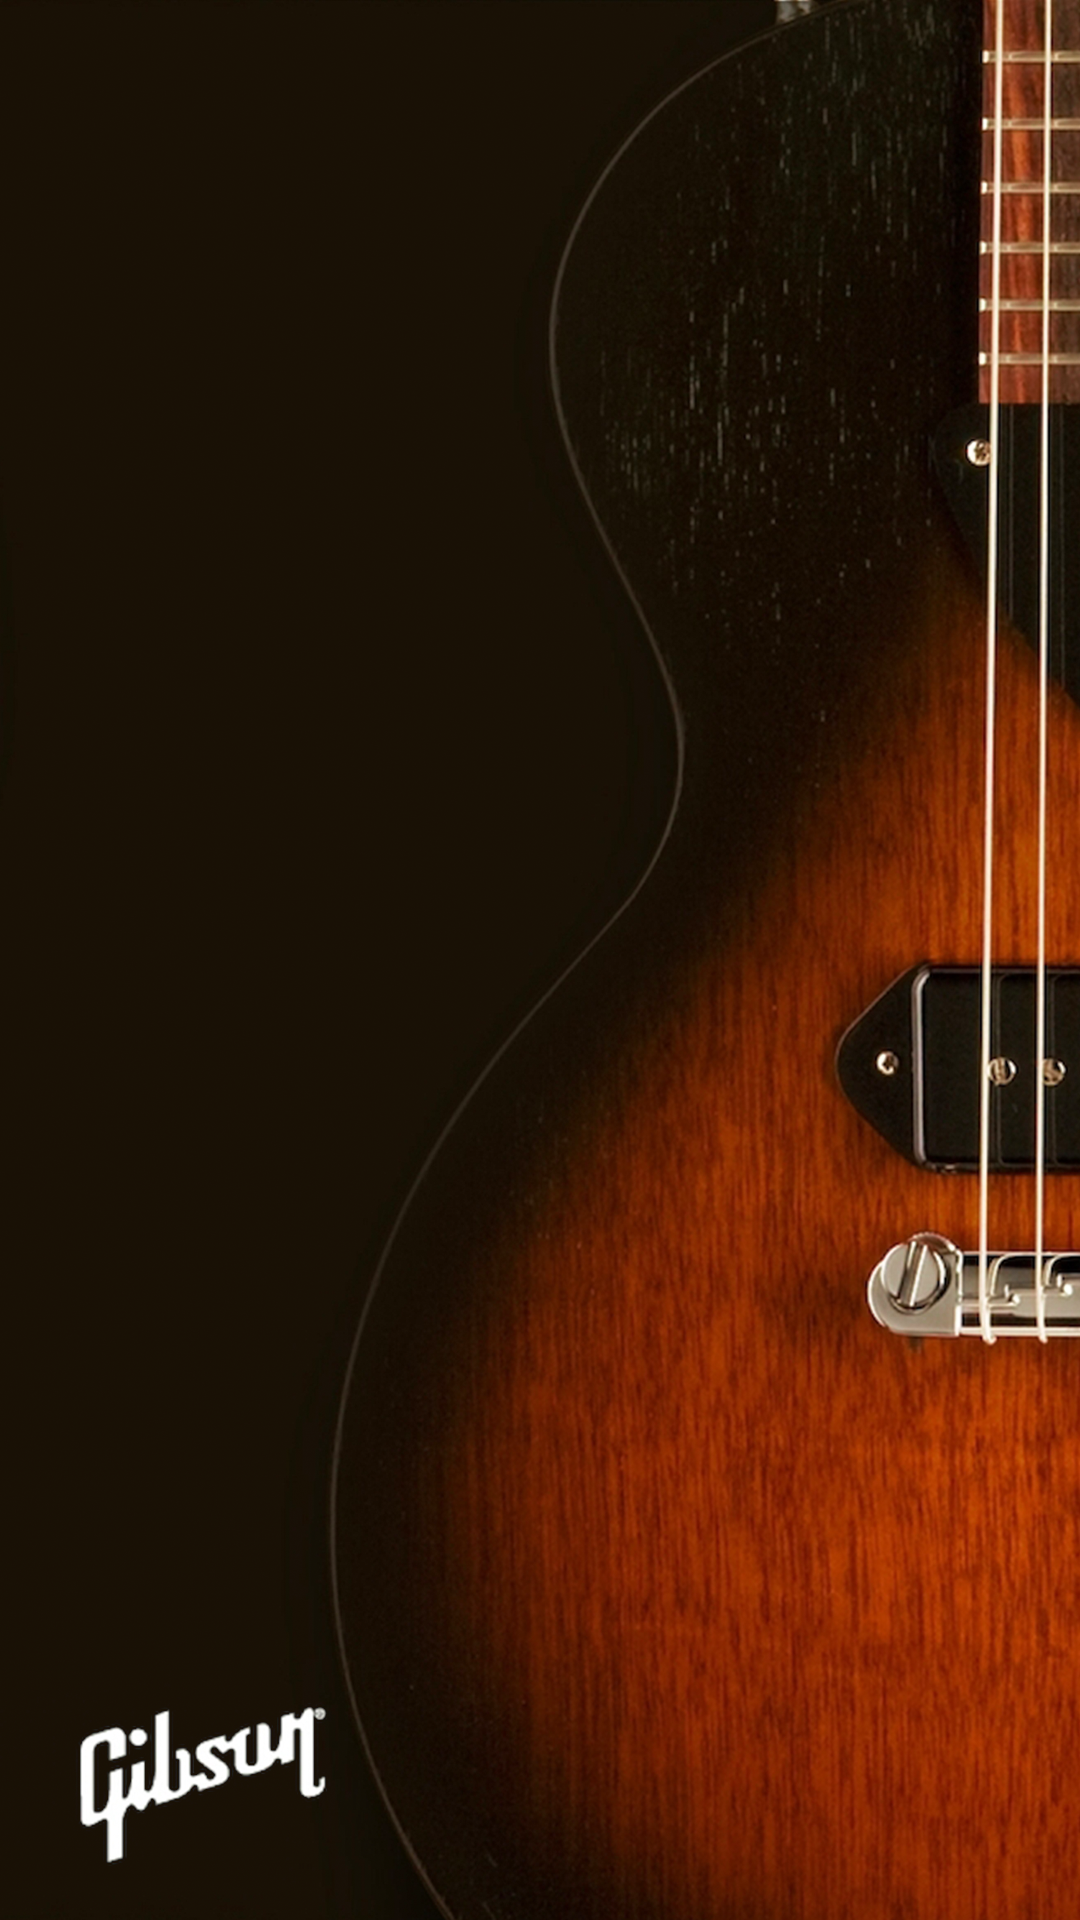 gibson iphone wallpaper,guitar,string instrument,string instrument,musical instrument,plucked string instruments